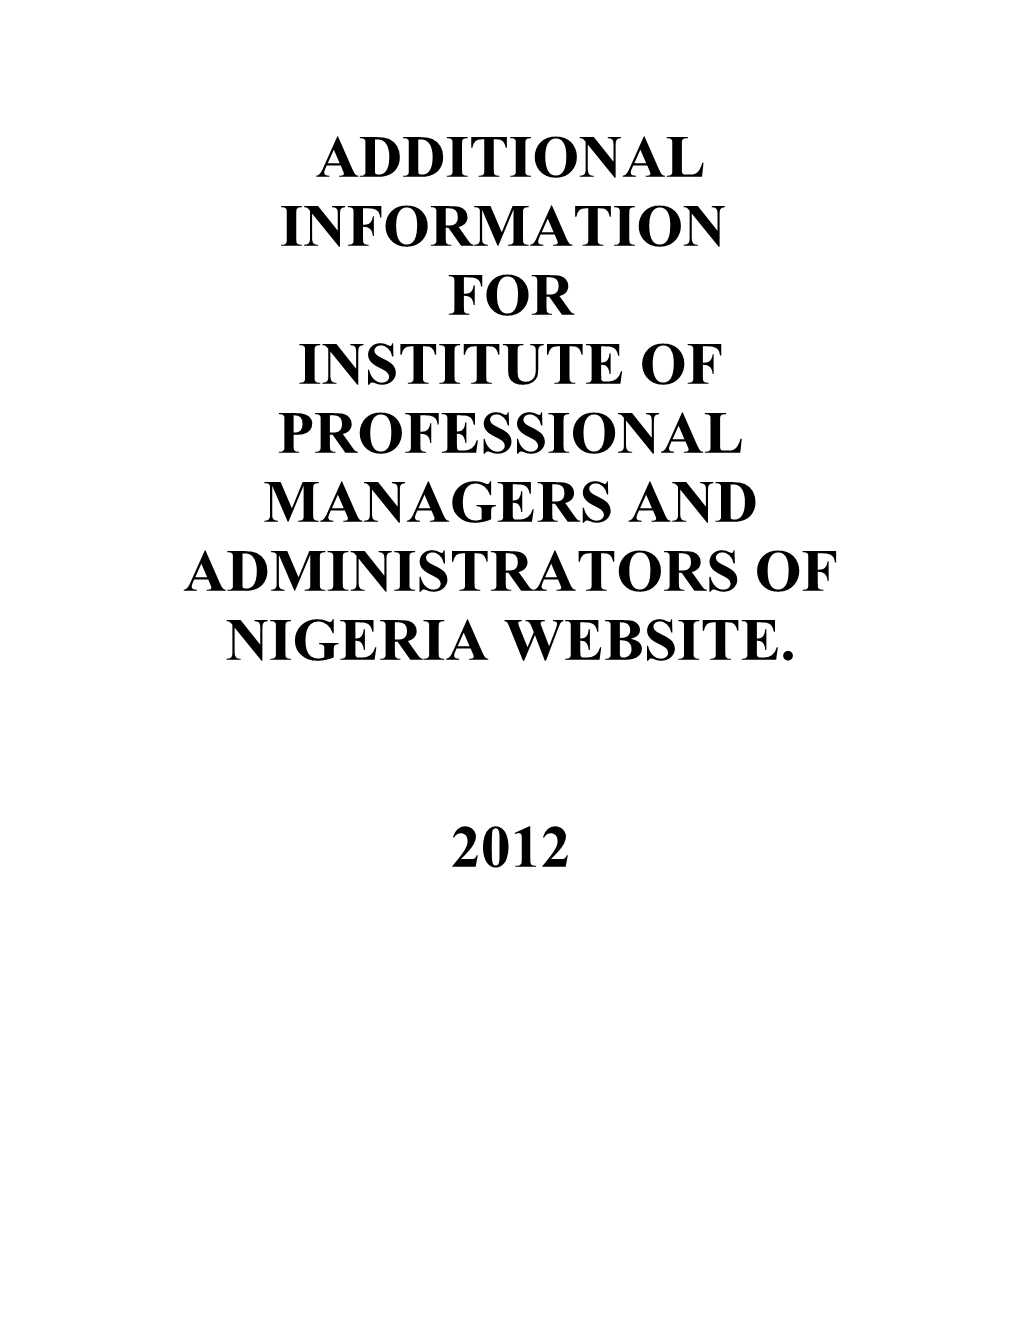 Institute of Professional Managers and Administrators of Nigeria Website